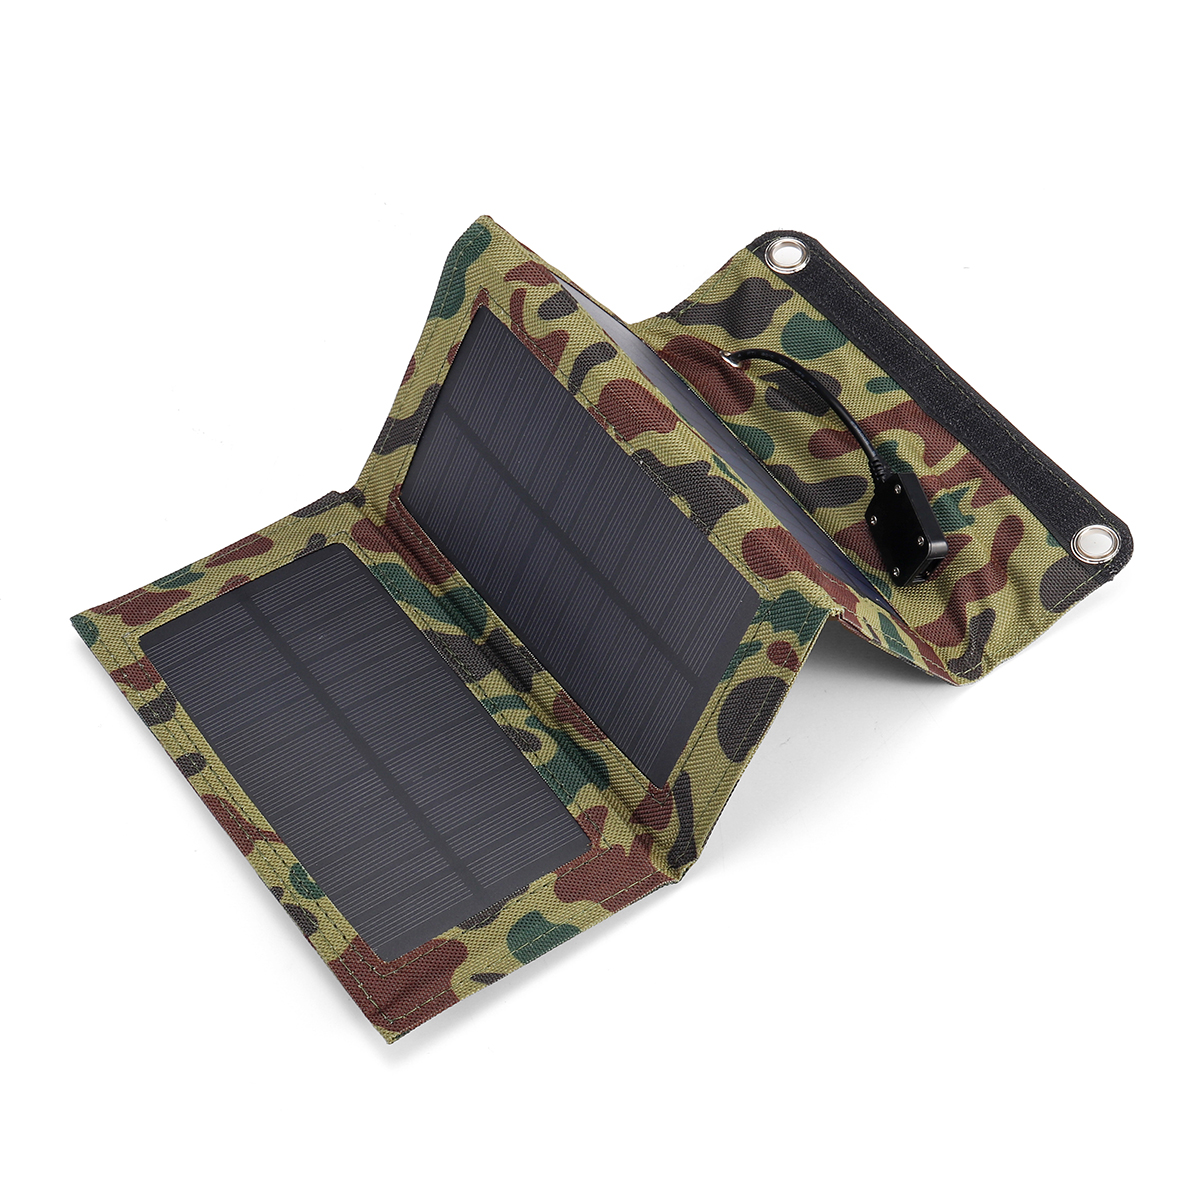 

10W 5V Waterproof Portable Foldable Solar Panel Charger with USB Port for Camping Hiking Climbing Power Bank